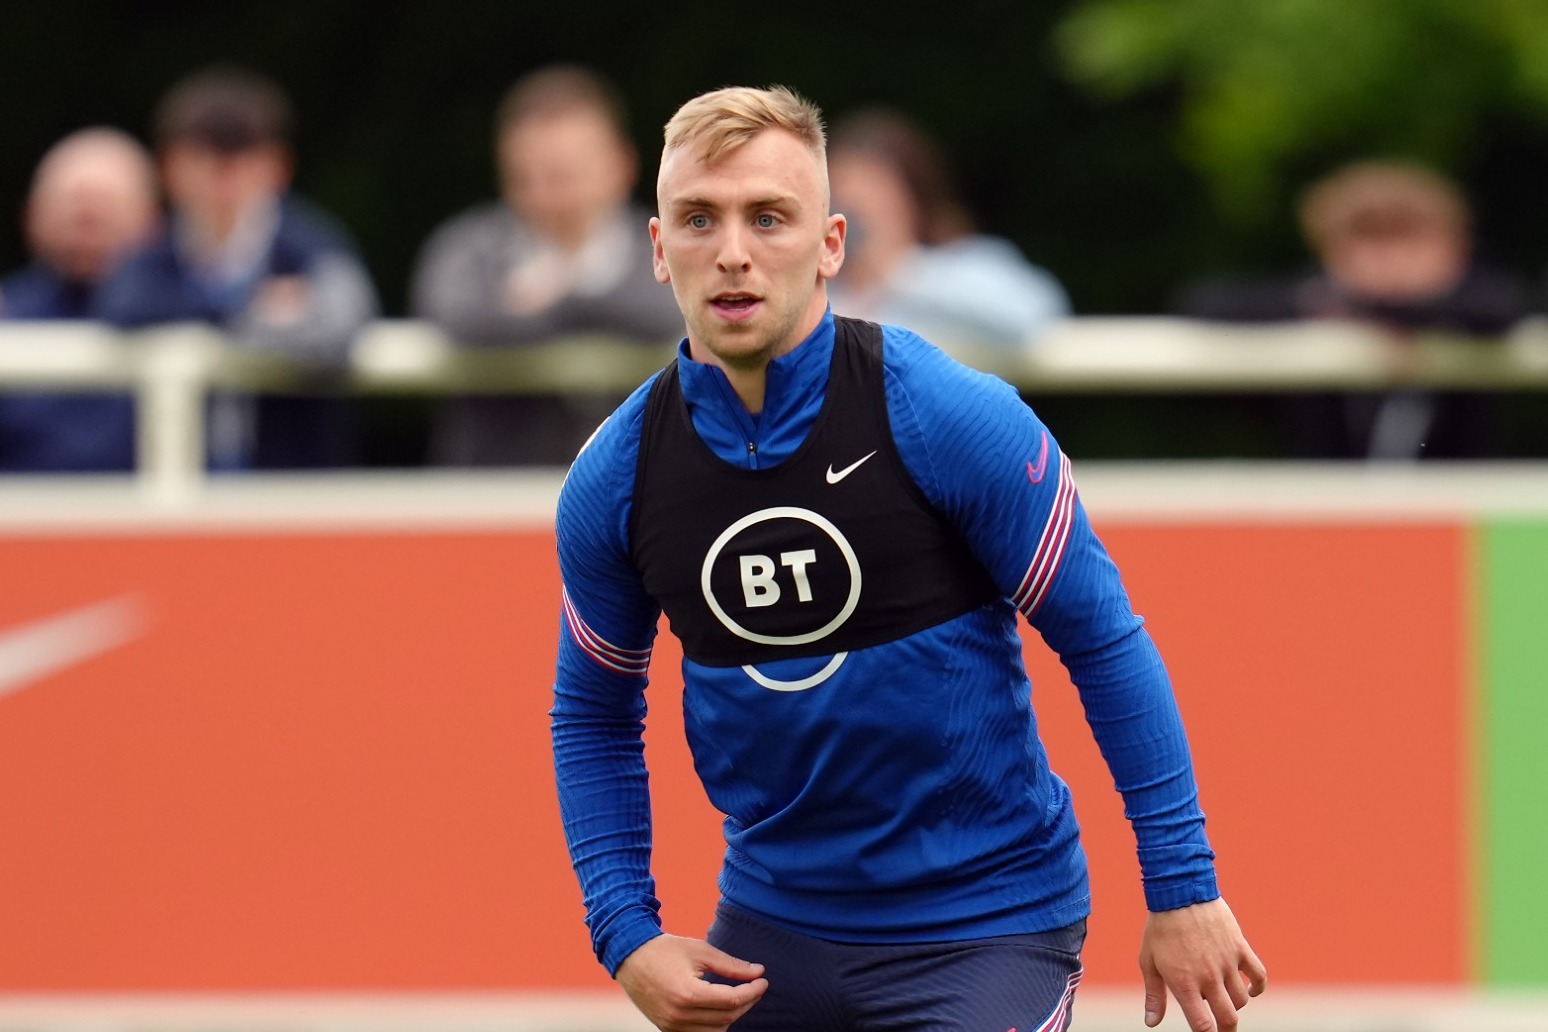 England call-up means ‘everything’ to Jarrod Bowen after journey from non-league 